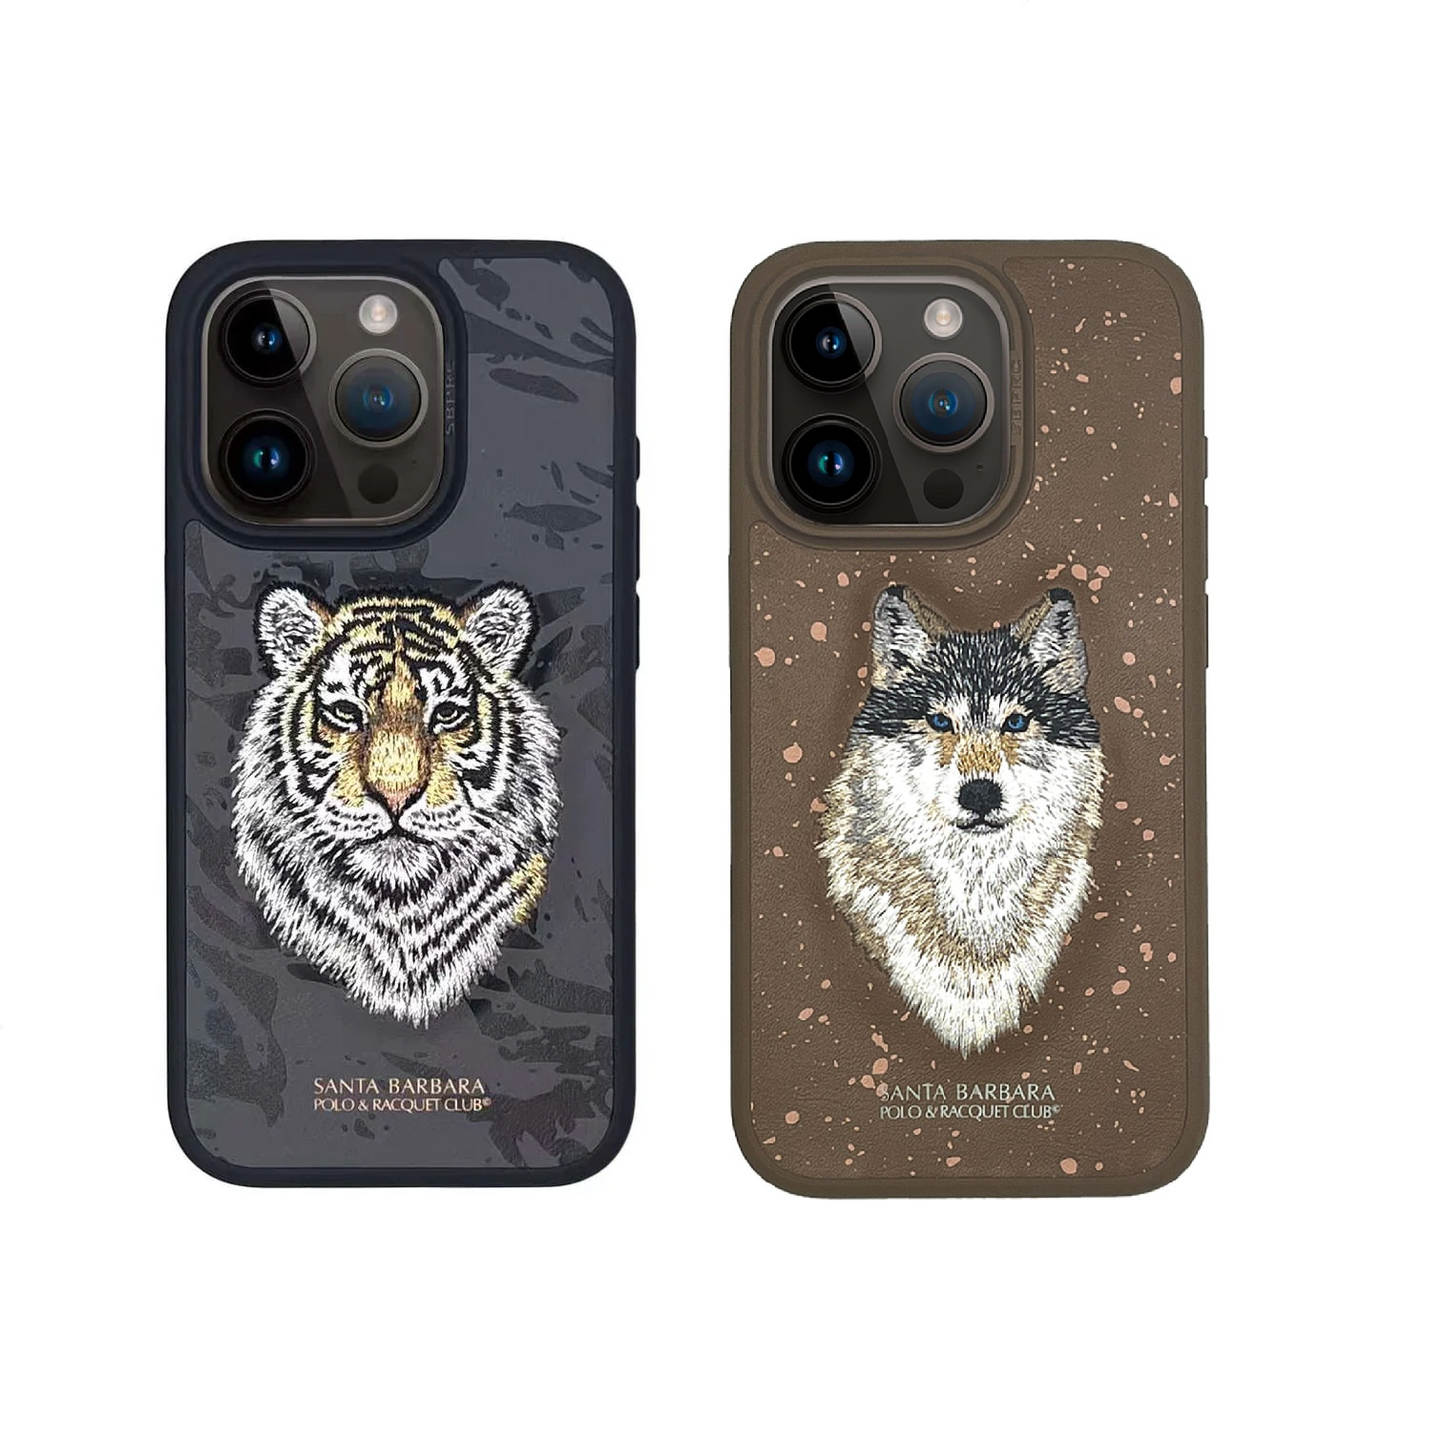 iPhone 15 Pro Santa Barbara Snow Leopard Embroidery Case Cover - Tiger / Wolf